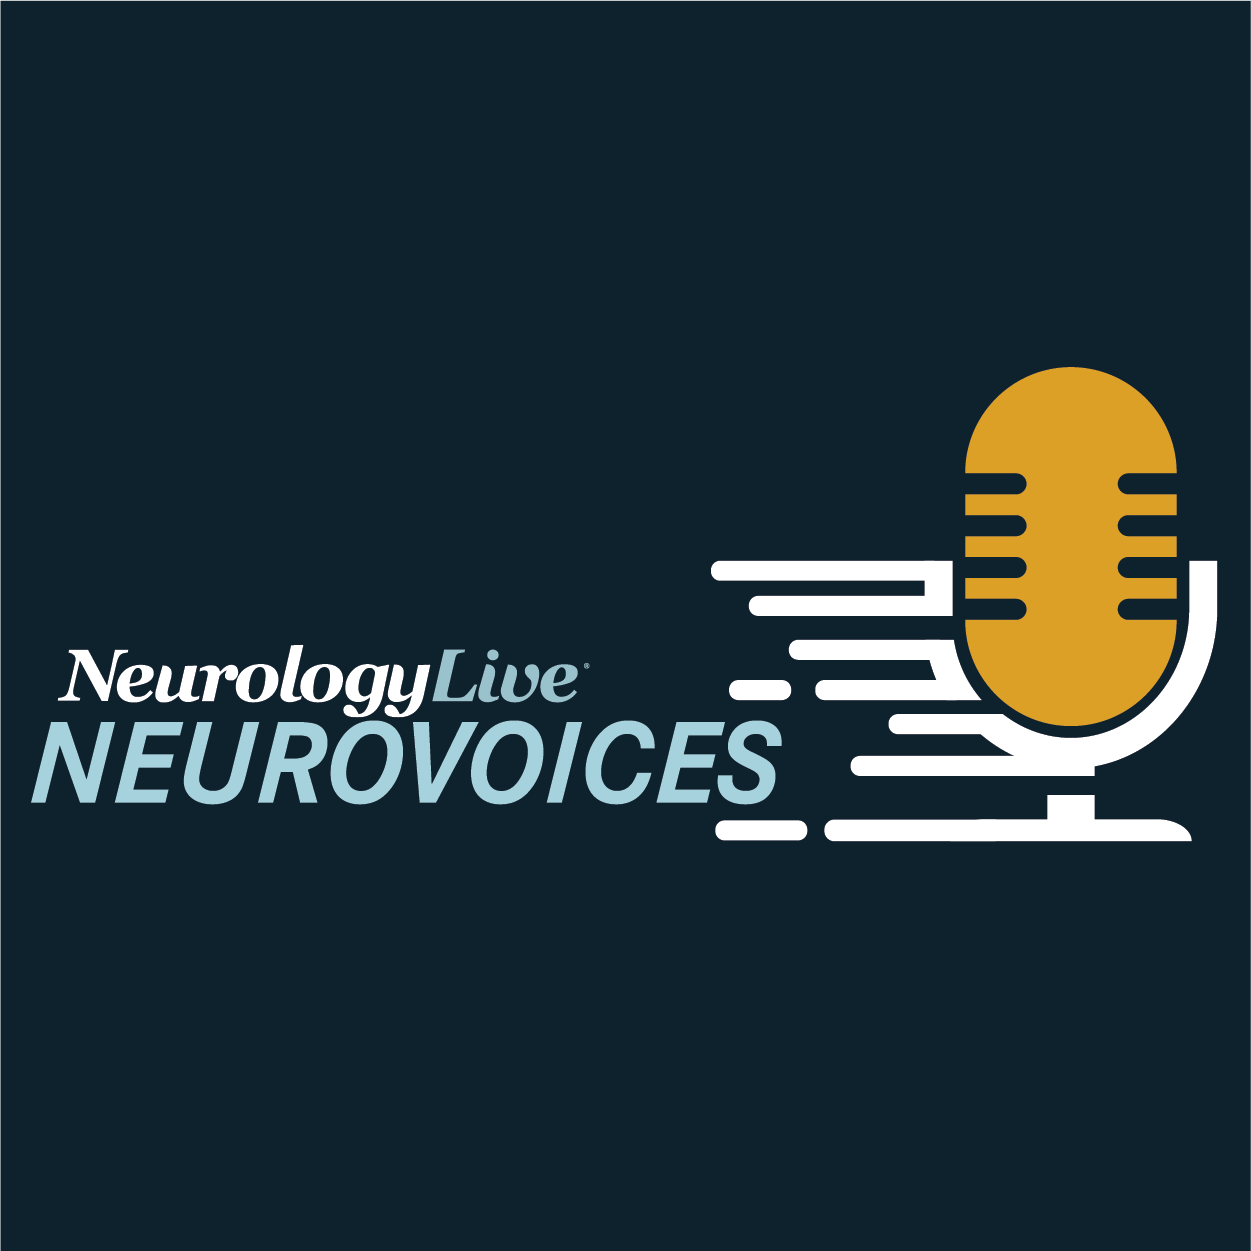 NeuroVoices: Craig Blackstone, MD, PhD, FANA, on Helping Path Research Careers for Young Medical Professionals